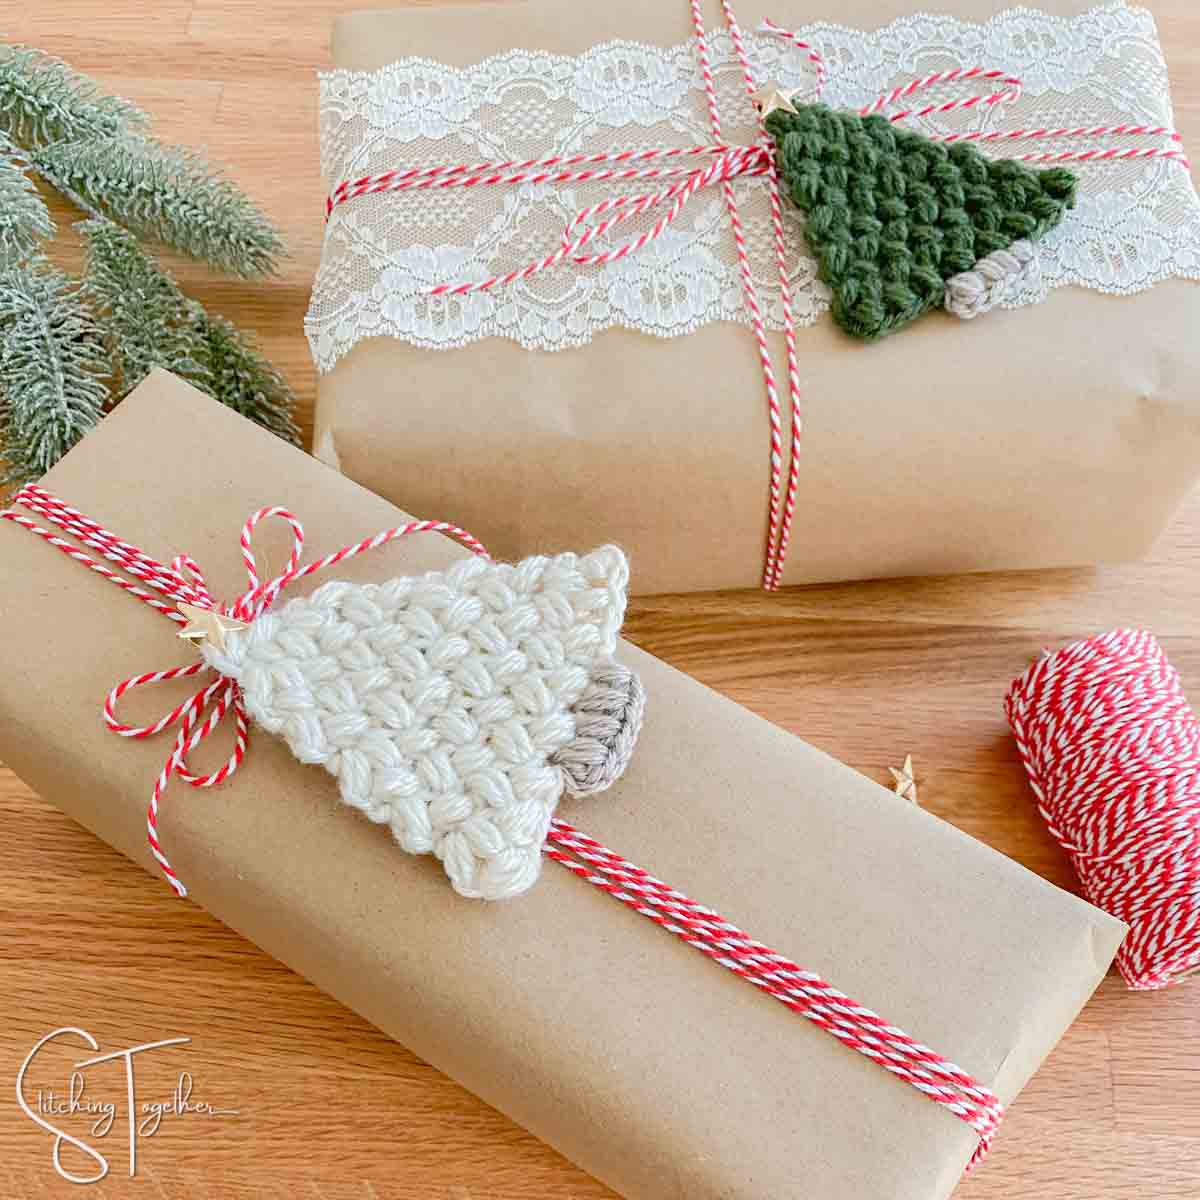 wrapped christmas gifts with Christmas Trees crocheted on the top